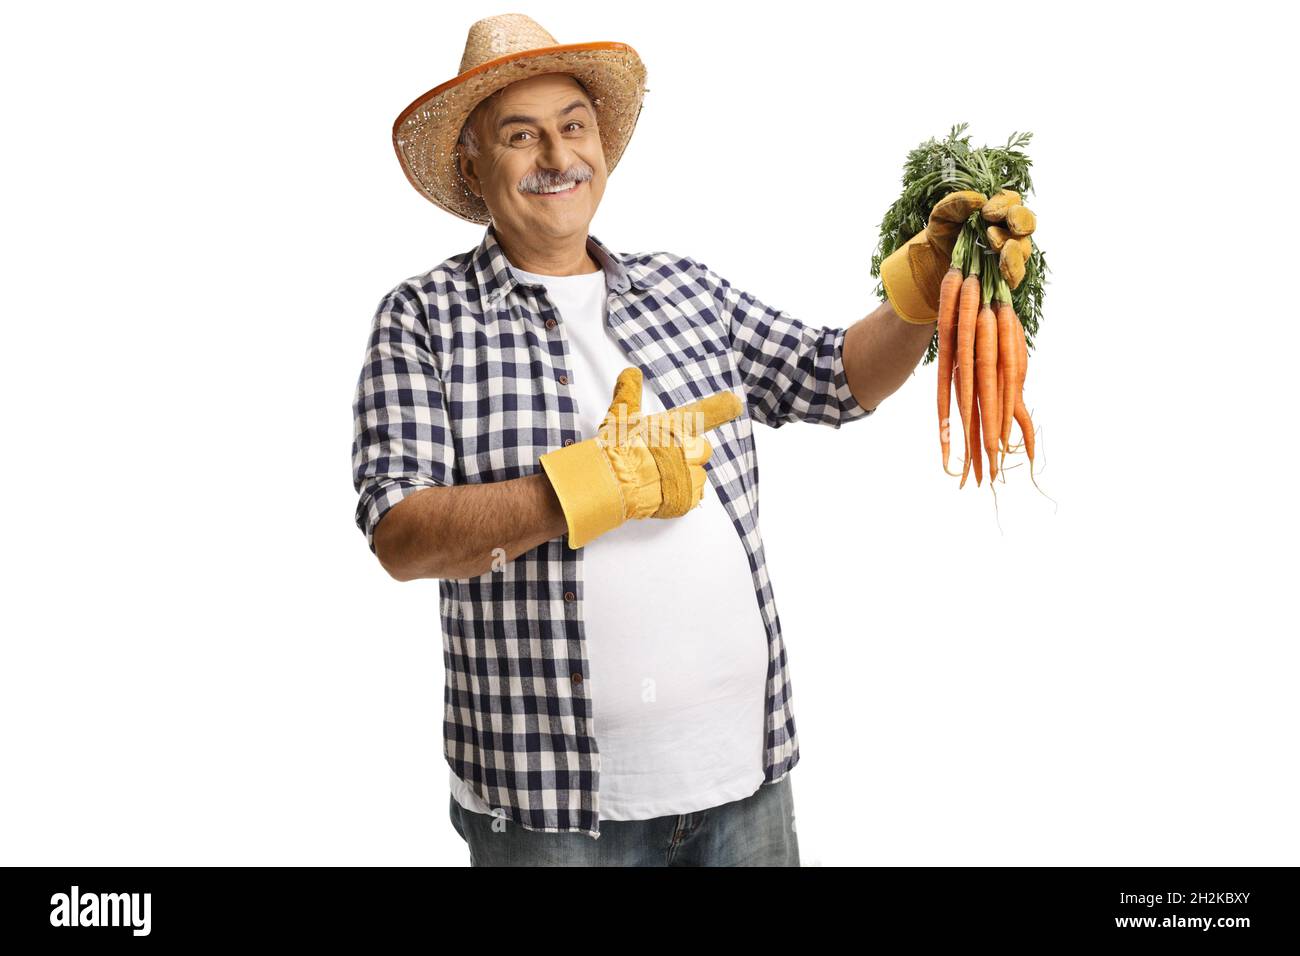 Farmer holding fresh organic carrots and pointing isolated on white background Stock Photo